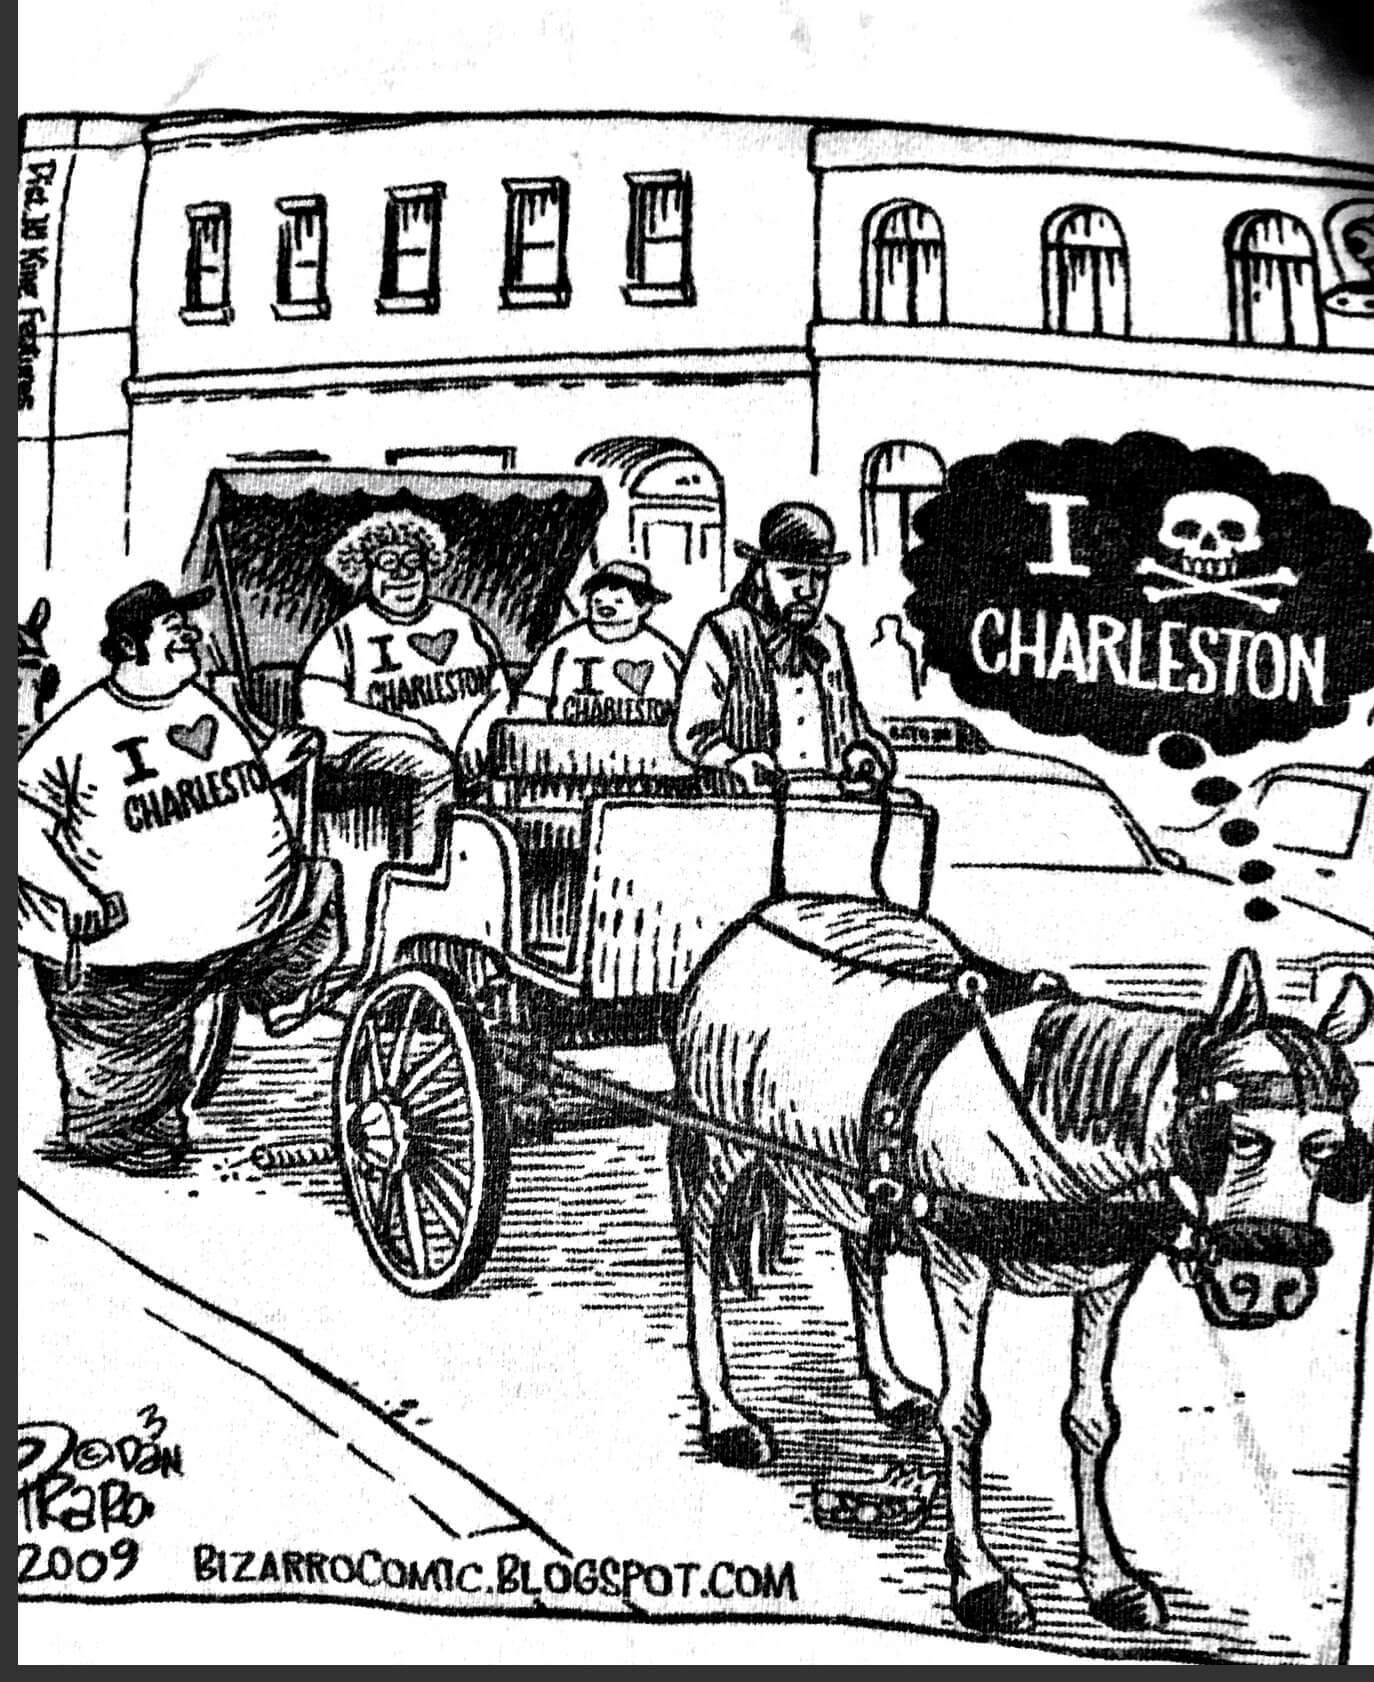 Comic strip photo showing large people in carriage with shirts that say "i heart charleston" and horse pulling carriage that has a thought bubble that says "i skull and crossbones charleston"